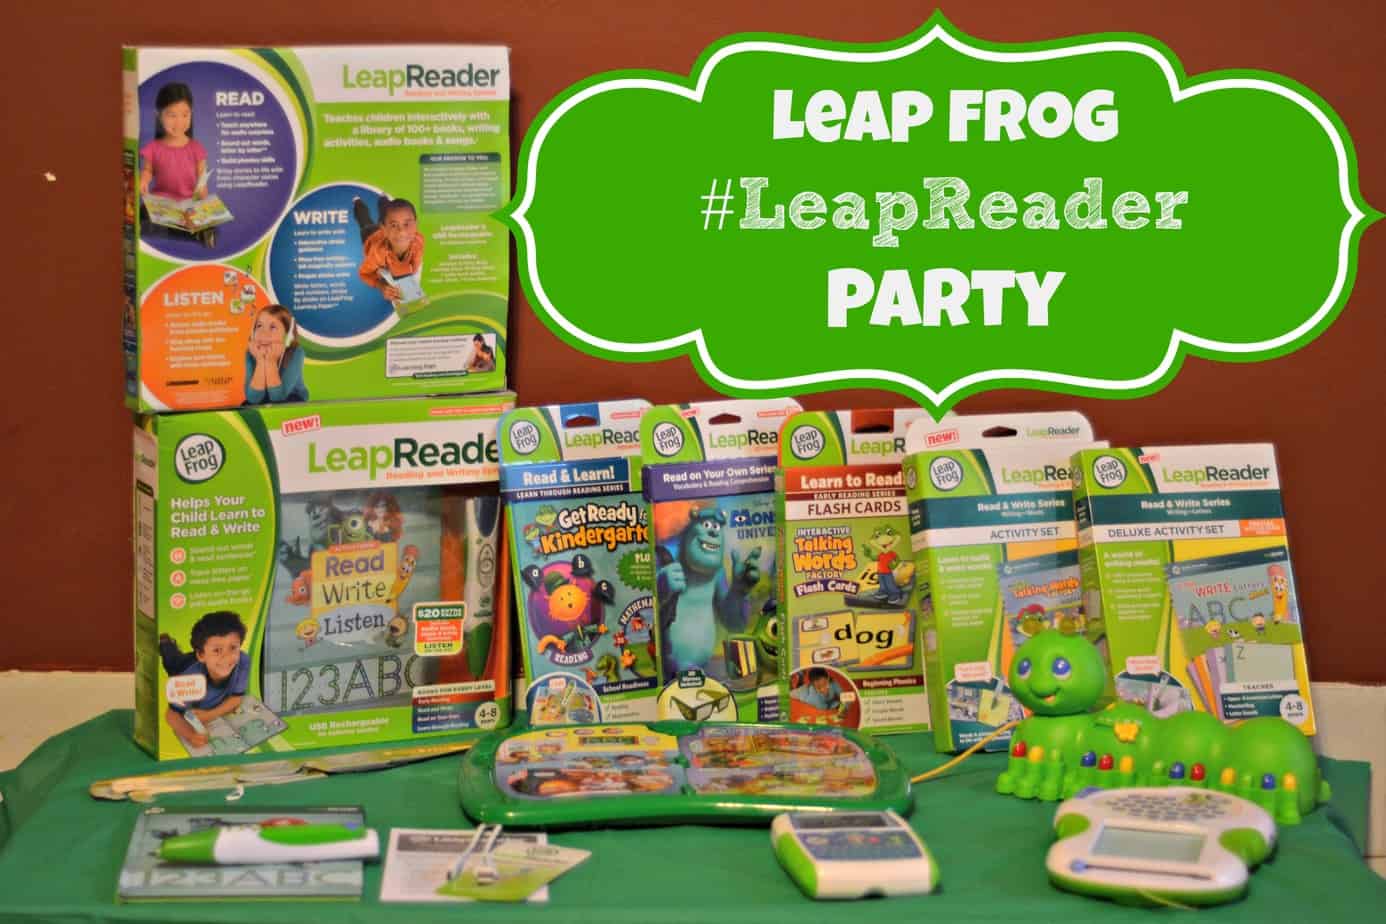 LEAPFROG TAG or LEAPREADER BOOKS and Junior Books $3.73 when you buy 4 or more 